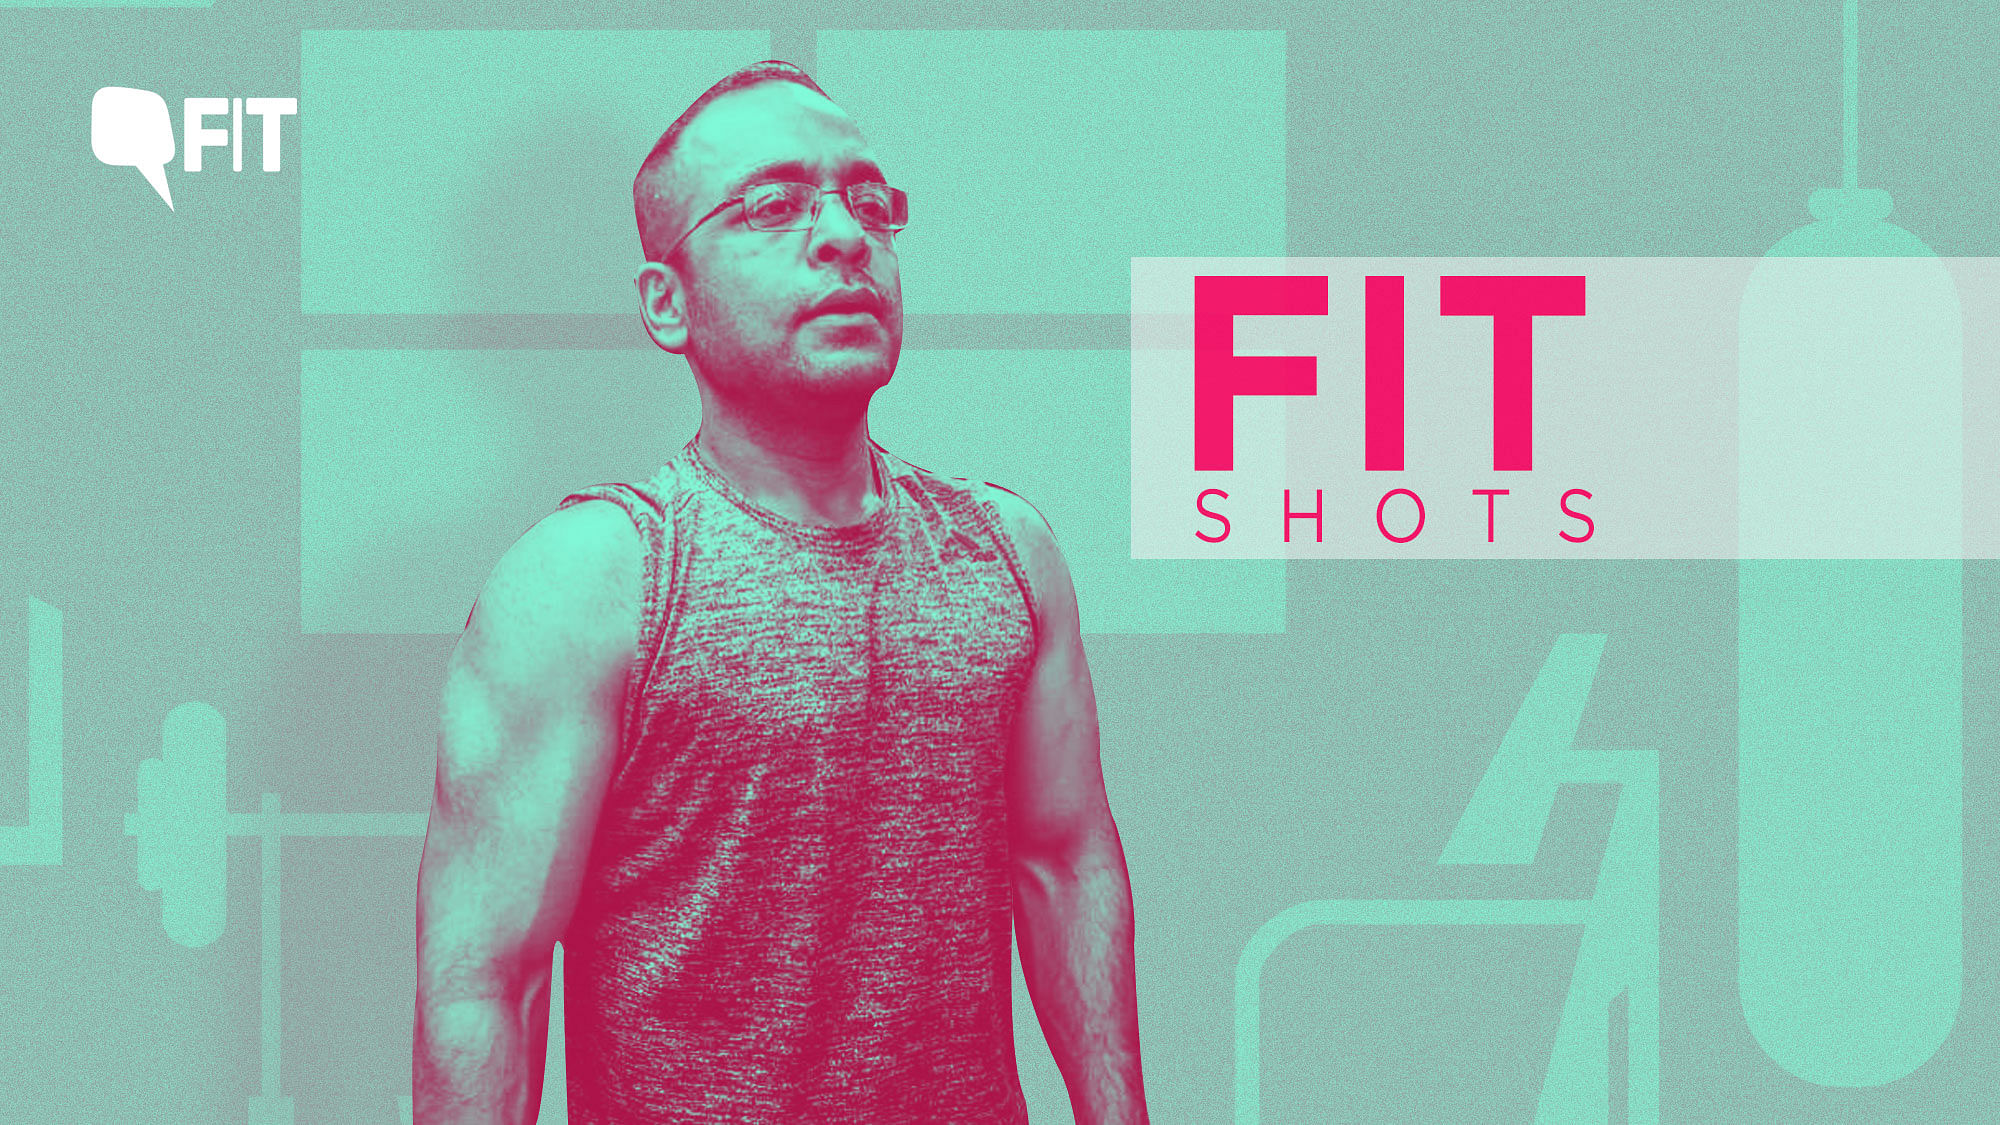 FITShots is a bi-monthly column that shares some real no-nonsense fitness and health advice.